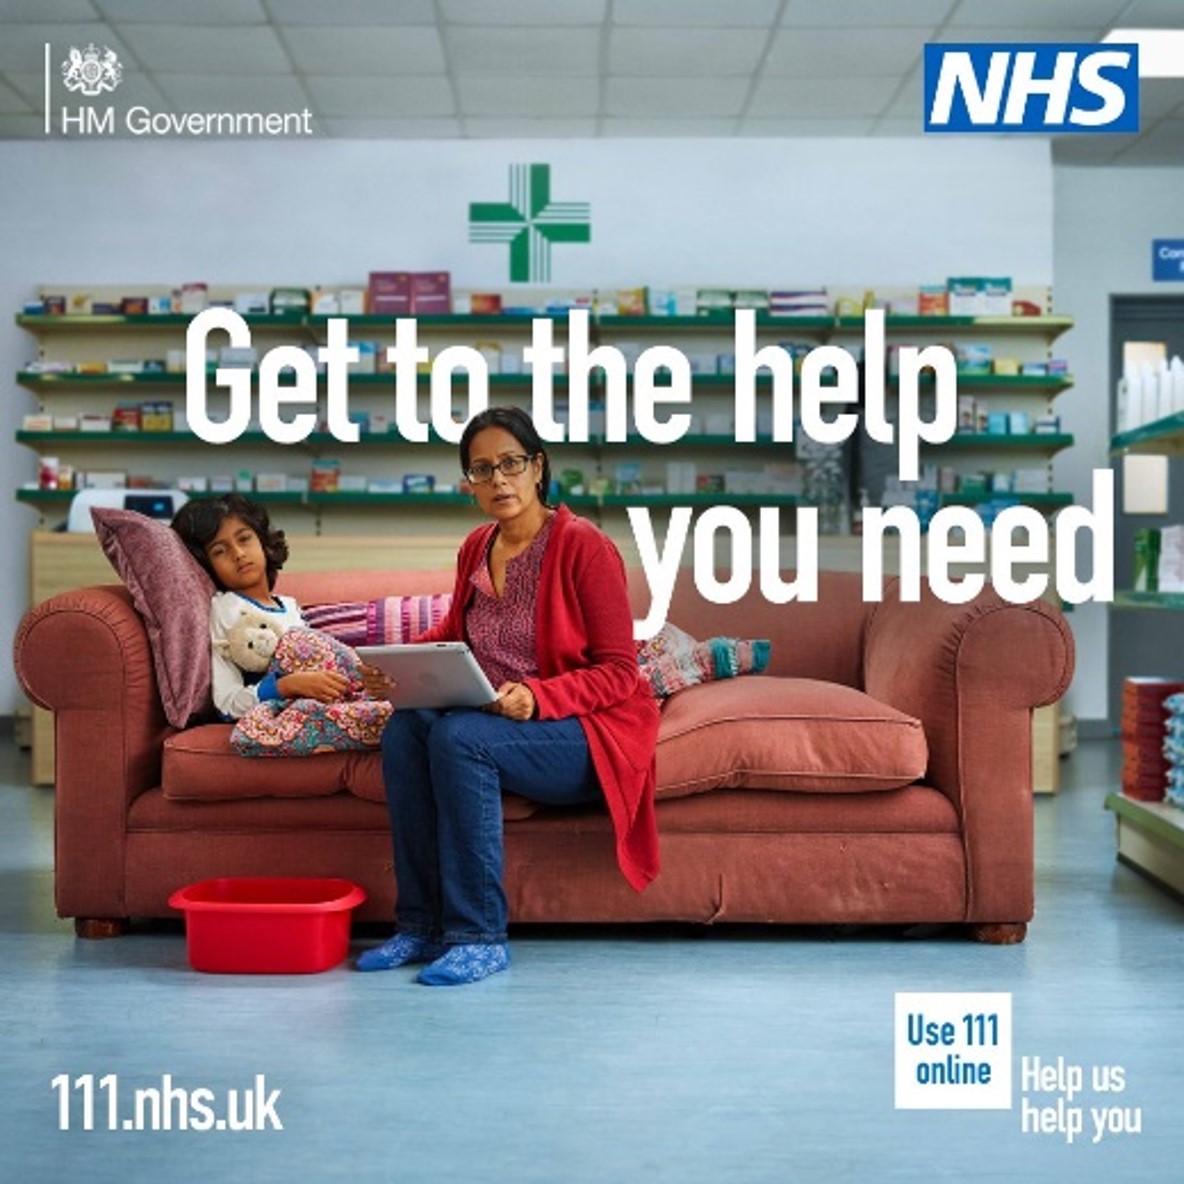 If you need urgent medical help over the May Bank Holiday weekend, but you aren’t sure where to go – contact NHS online or call 111 for urgent medical help. ➡️ 111.nhs.uk